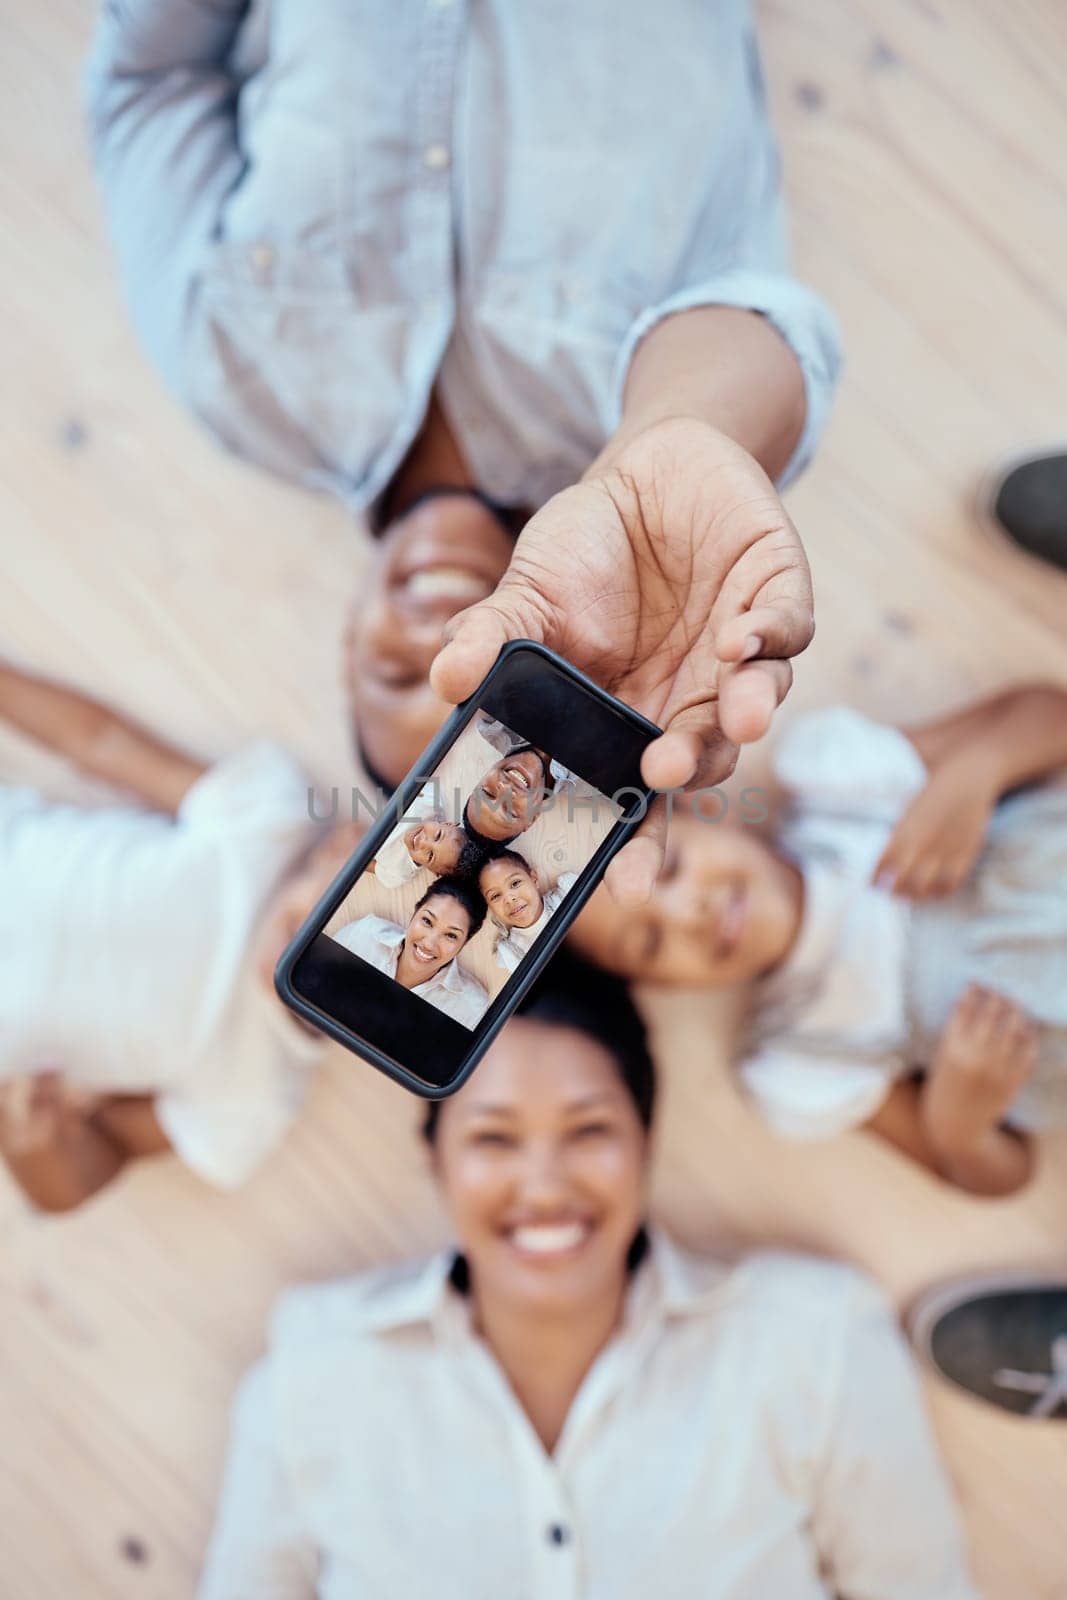 Top view, family and phone selfie in home for happy memory together on floor. Love, care and 5g mobile picture of happy mother, father and children bonding for social media, internet or online post